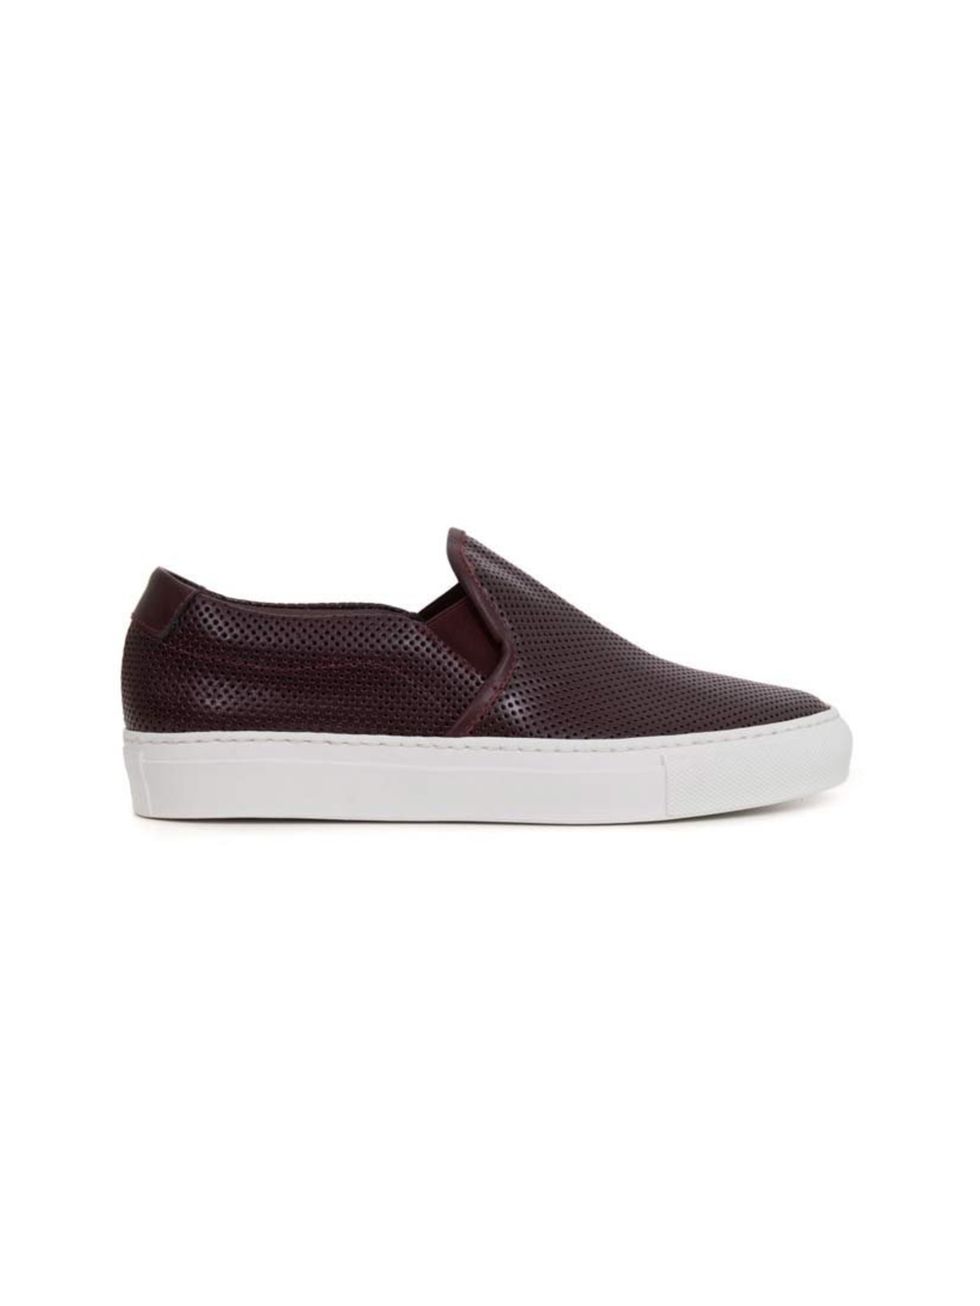 <p>The skater shoe gets an upgrade.</p><p>Common Projects slip-ons, £285 at <a href="http://shop.doverstreetmarket.com/sneaker-space/common-projects/common-projects-women-s-slip-on-perforated-ox-blood">Dover Street Market</a></p>